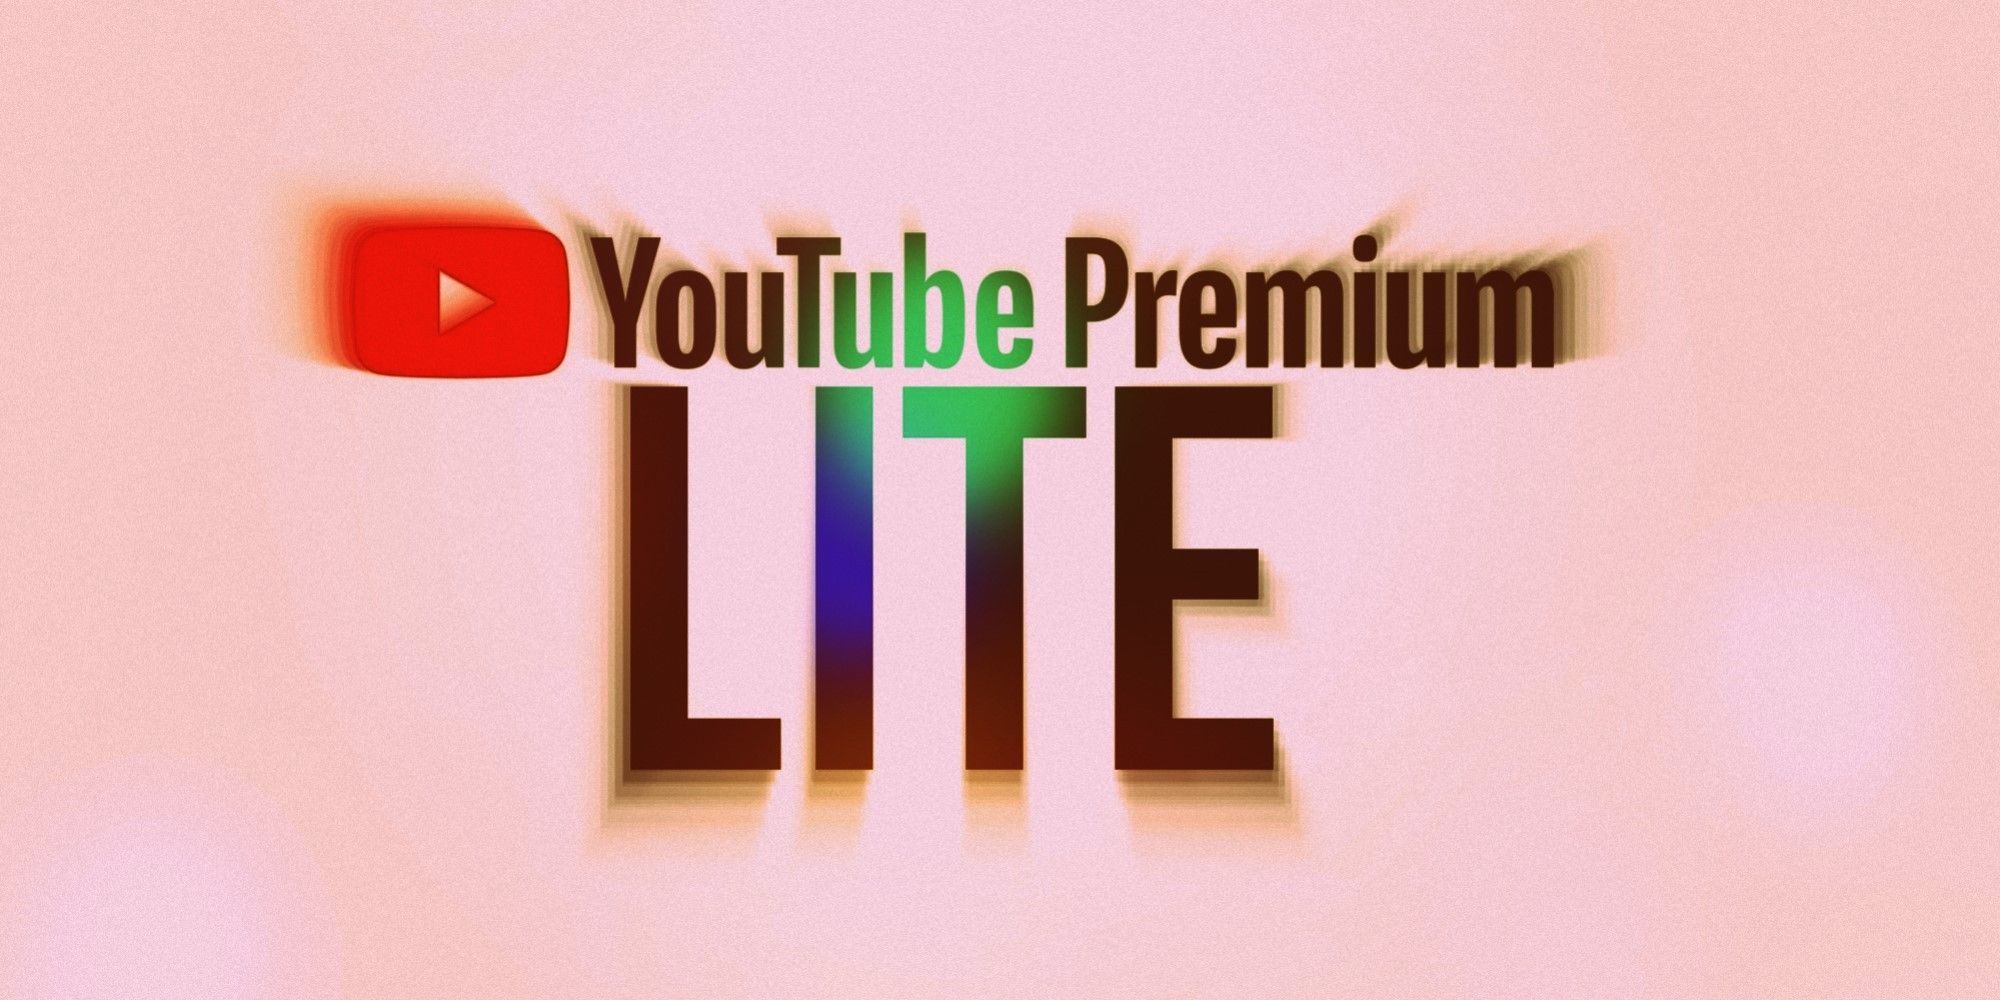 YouTube Premium Lite Costs Less But It Is Missing Key Benefits